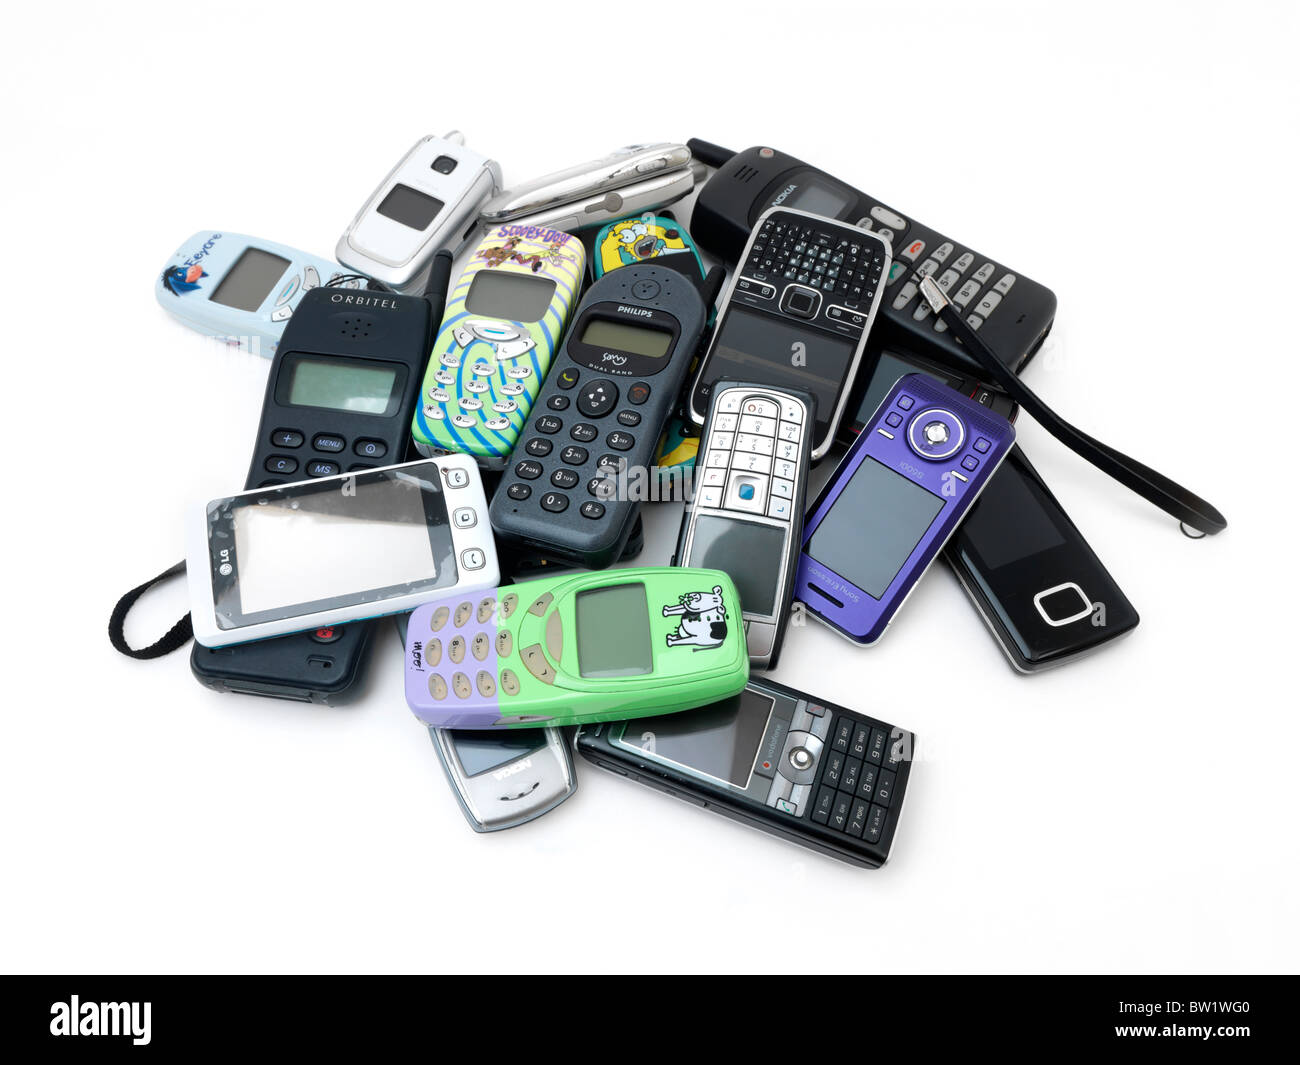 A Pile Of Old And New Mobile Phones Nokia, Samsung, LG, Motorola, Phillips  And Sony Ericsson Stock Photo - Alamy